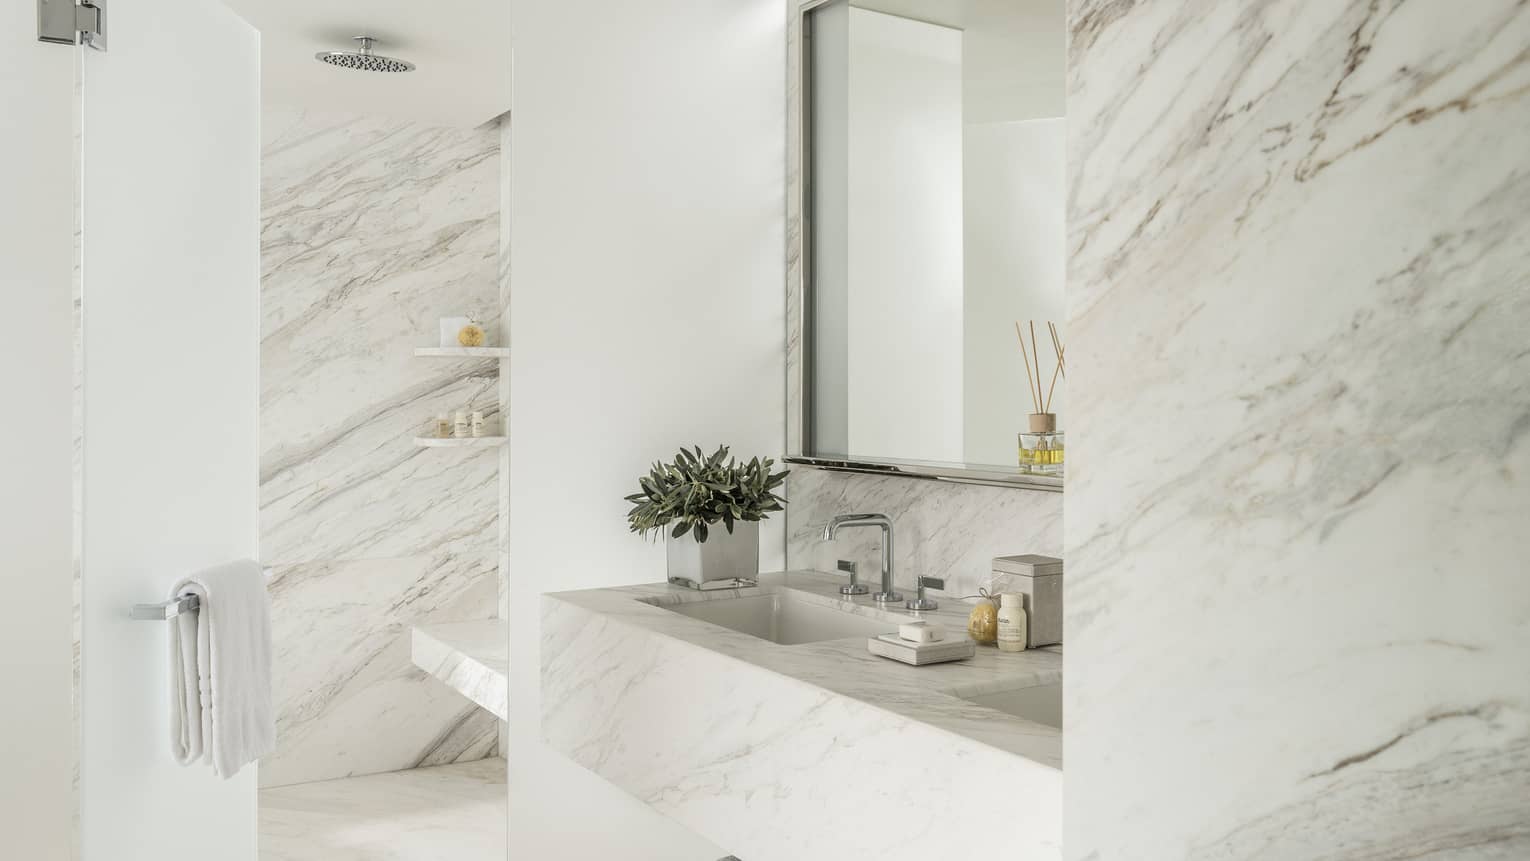 Arion Corner Suite Bathroom with marbled double vanity and full-width mirror